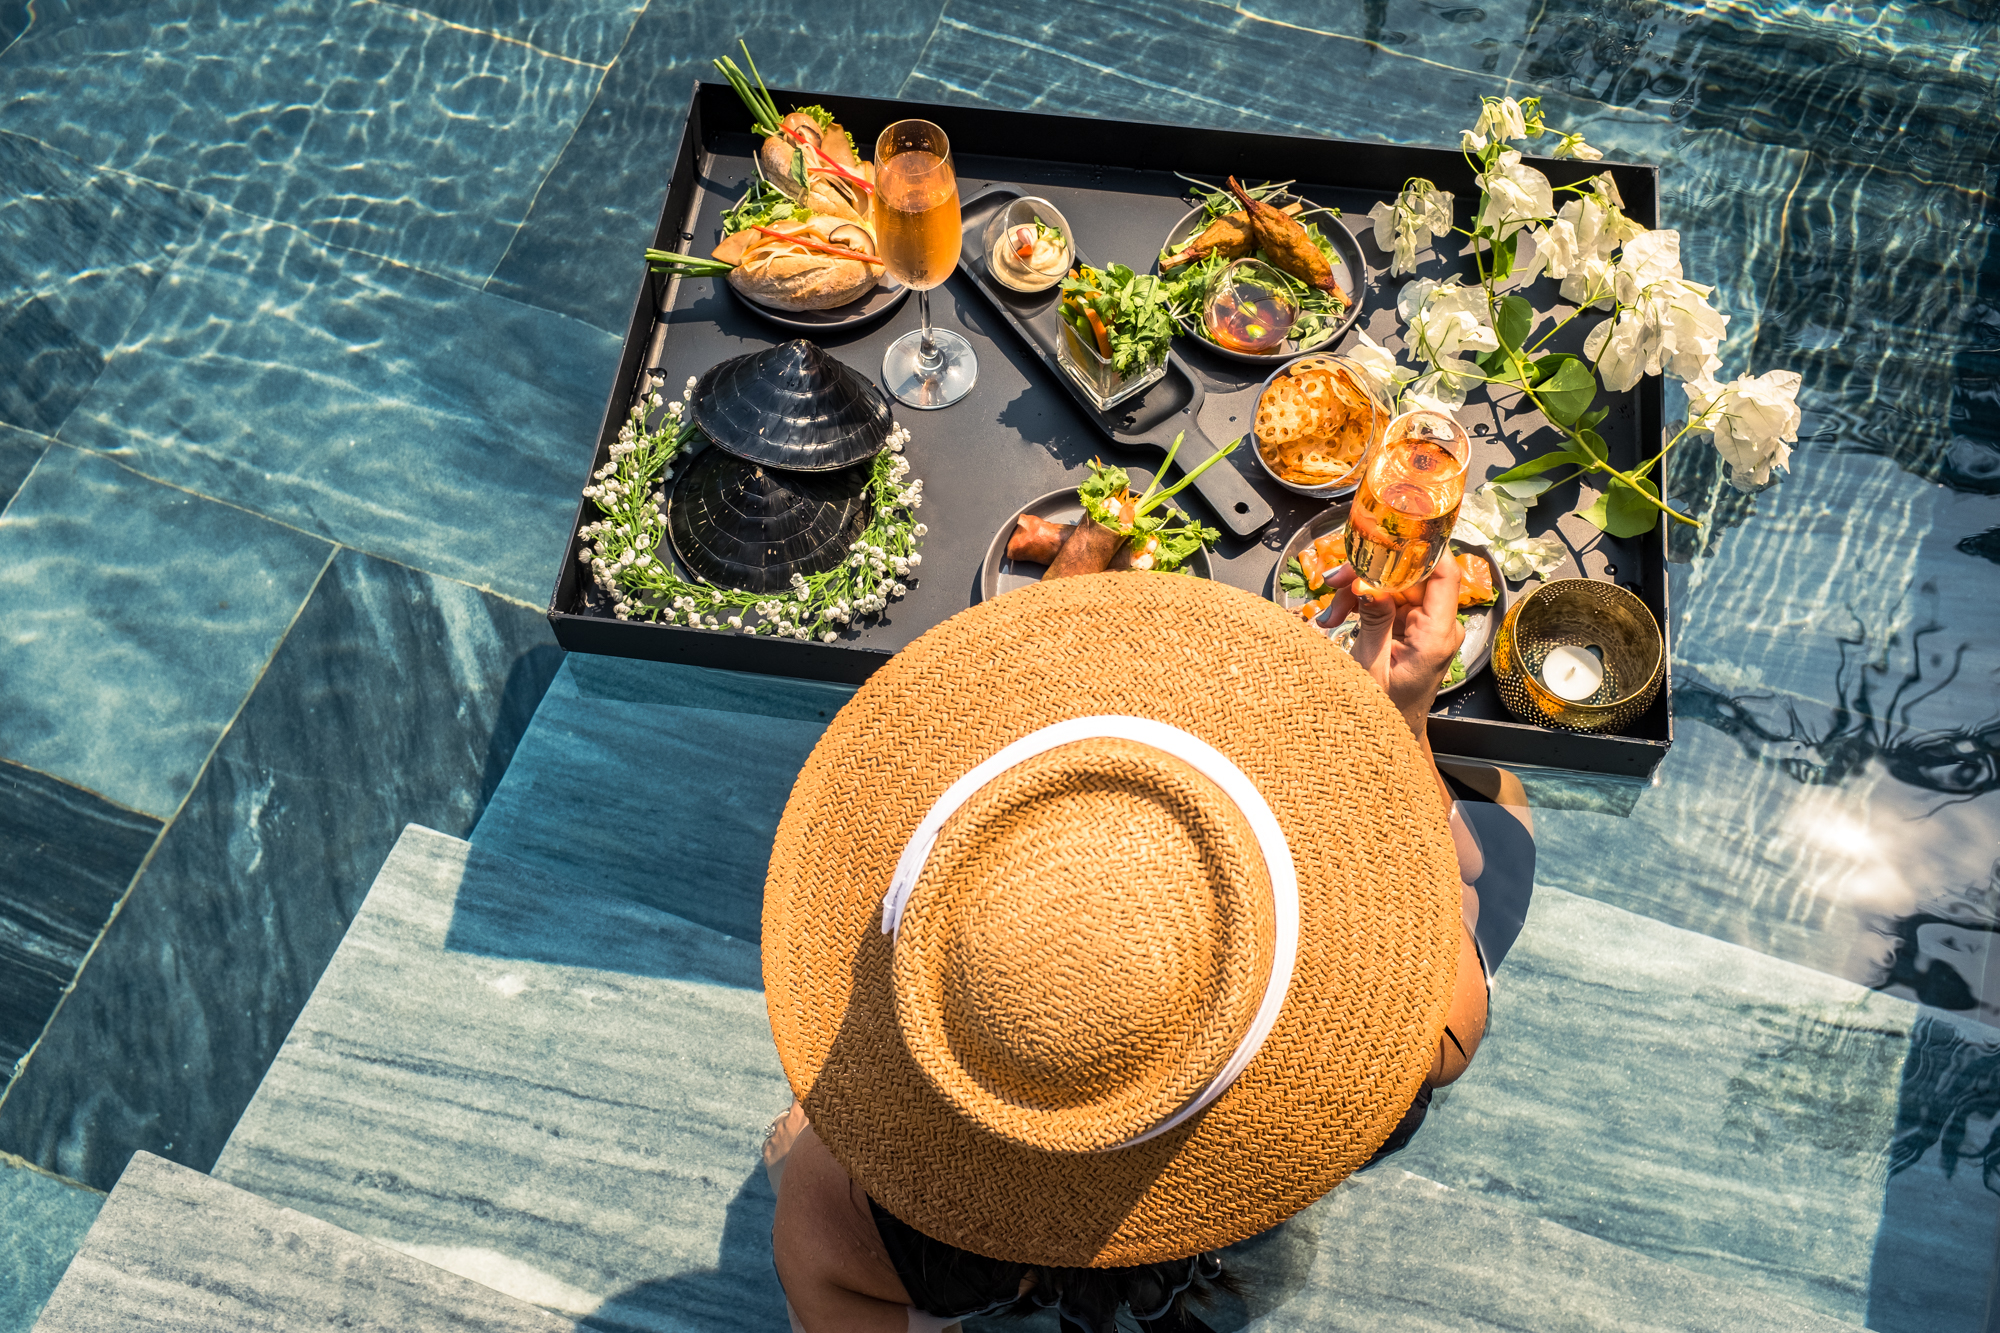 Floating breakfast is enjoyed at a pool at a luxury resort in Vietnam